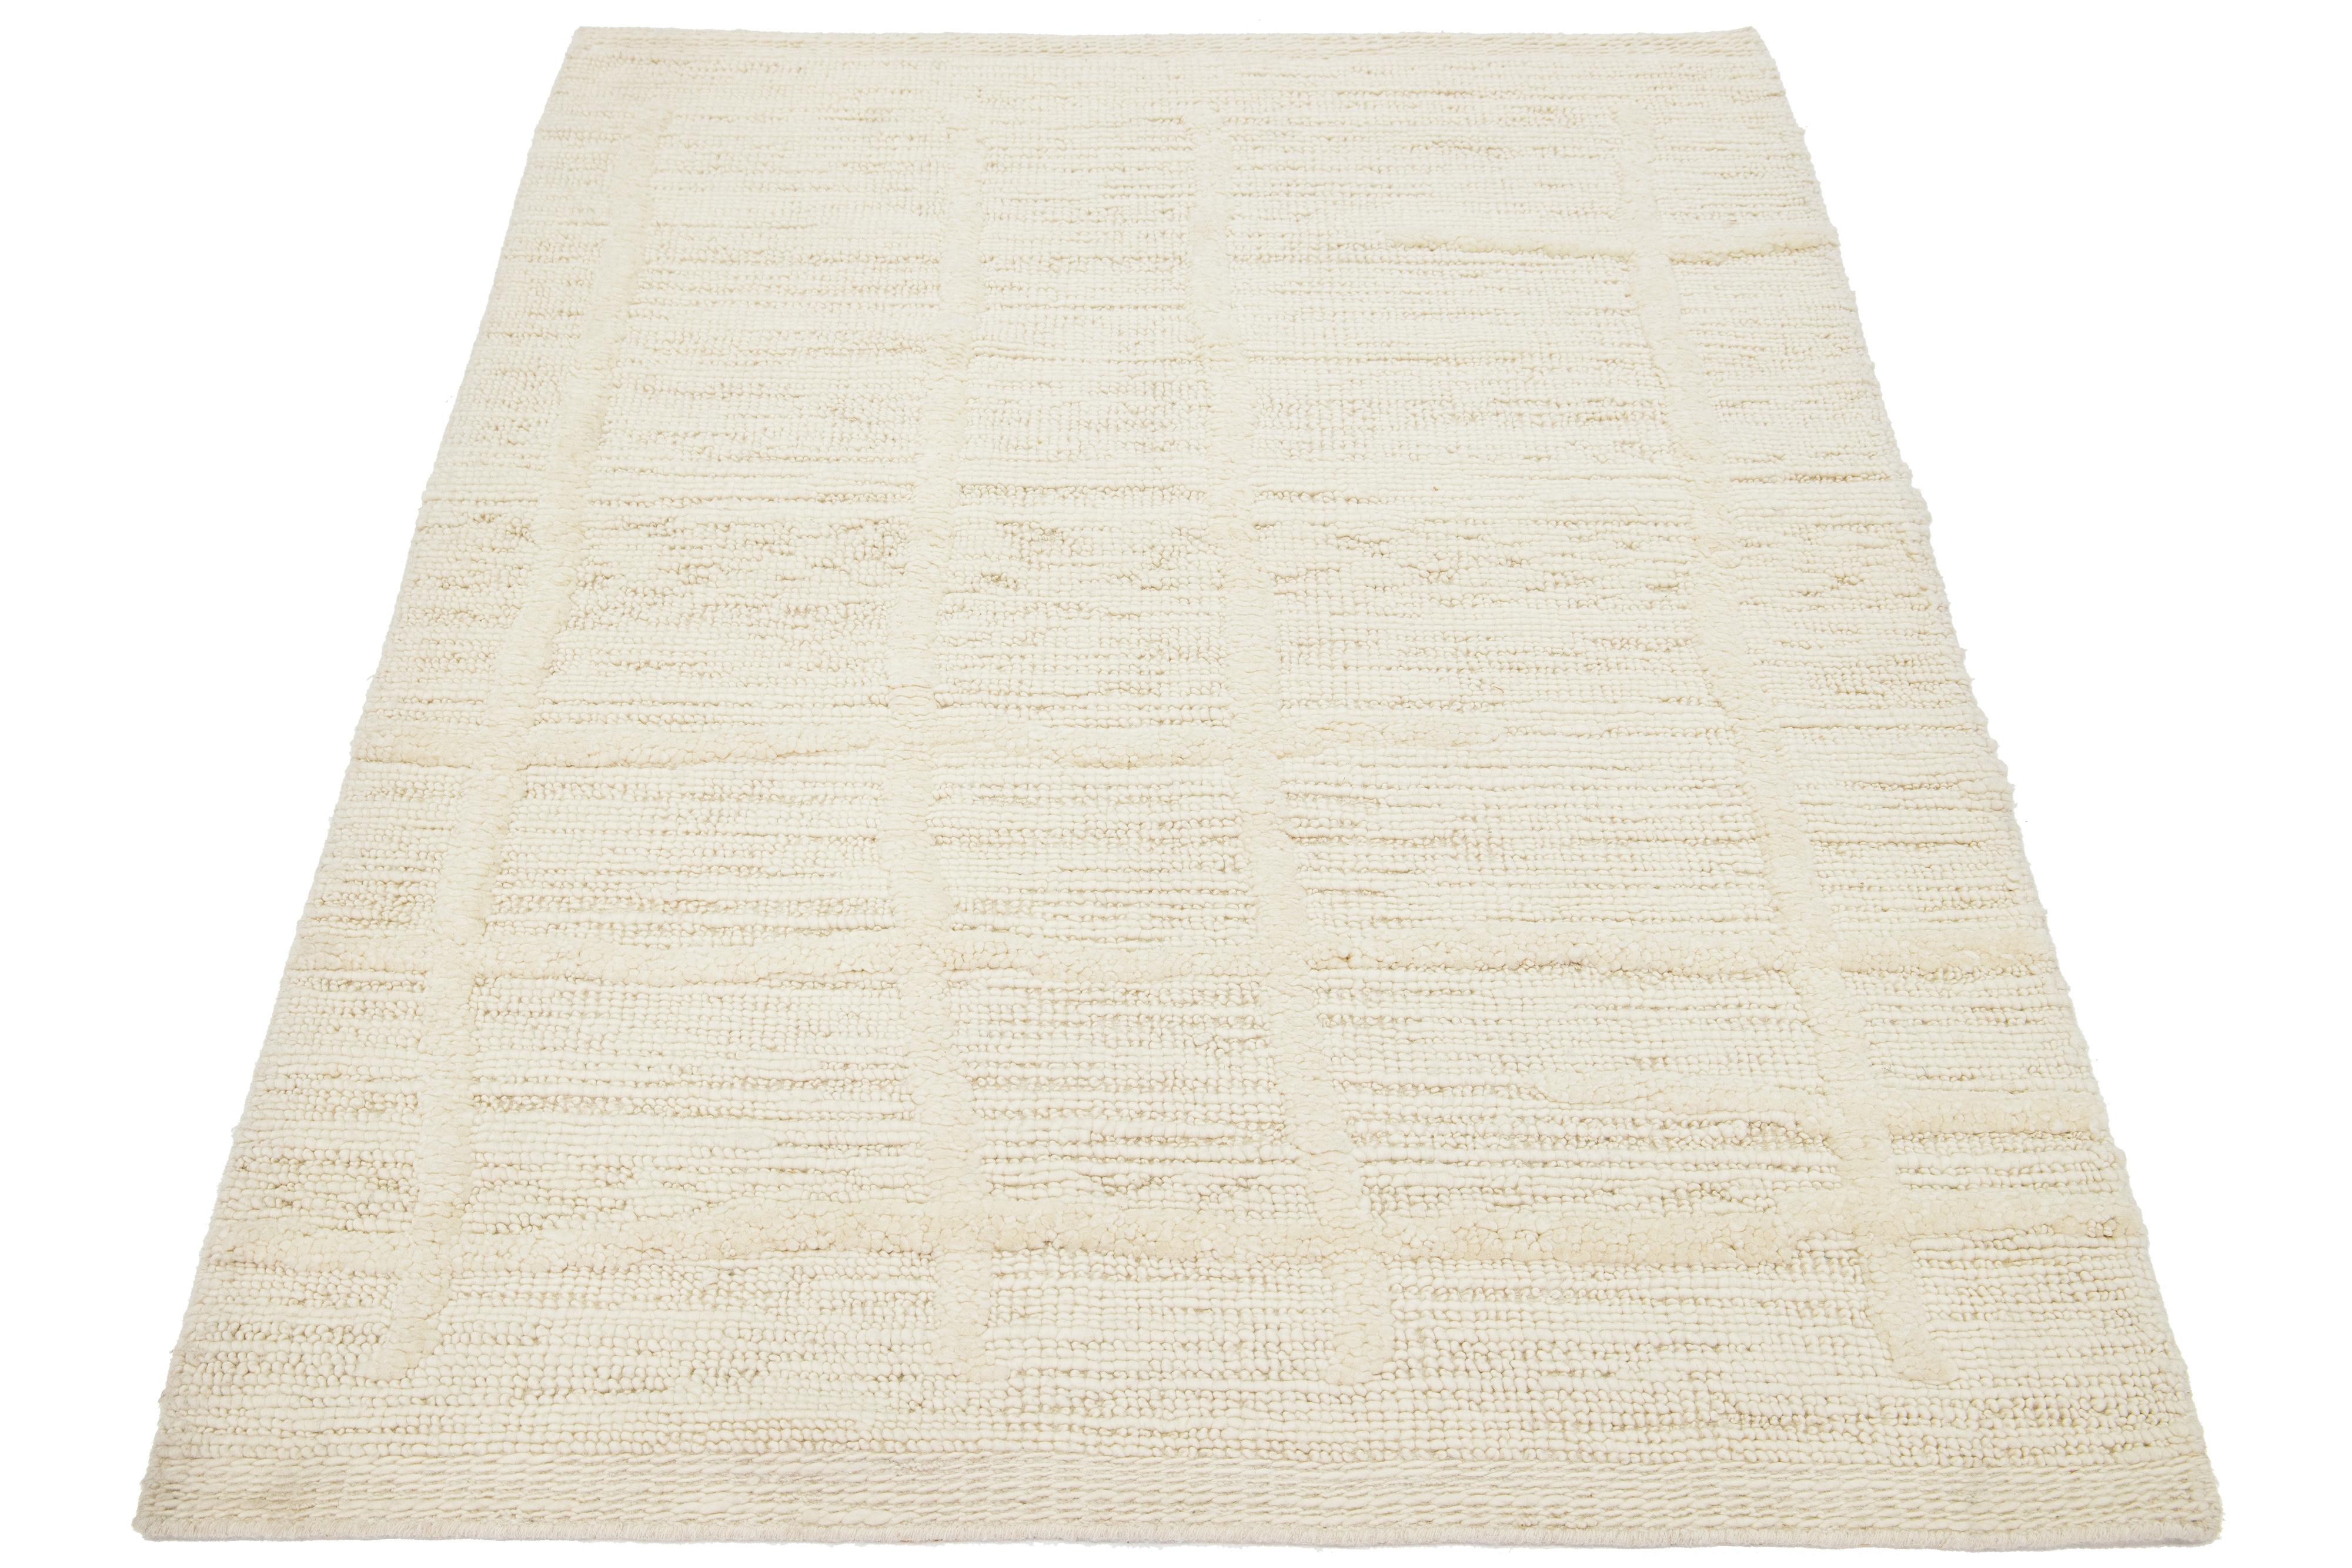 This contemporary Moroccan rug is handcrafted with care and showcases a minimalist and luxurious ivory-tone design.

This rug measures 4'3